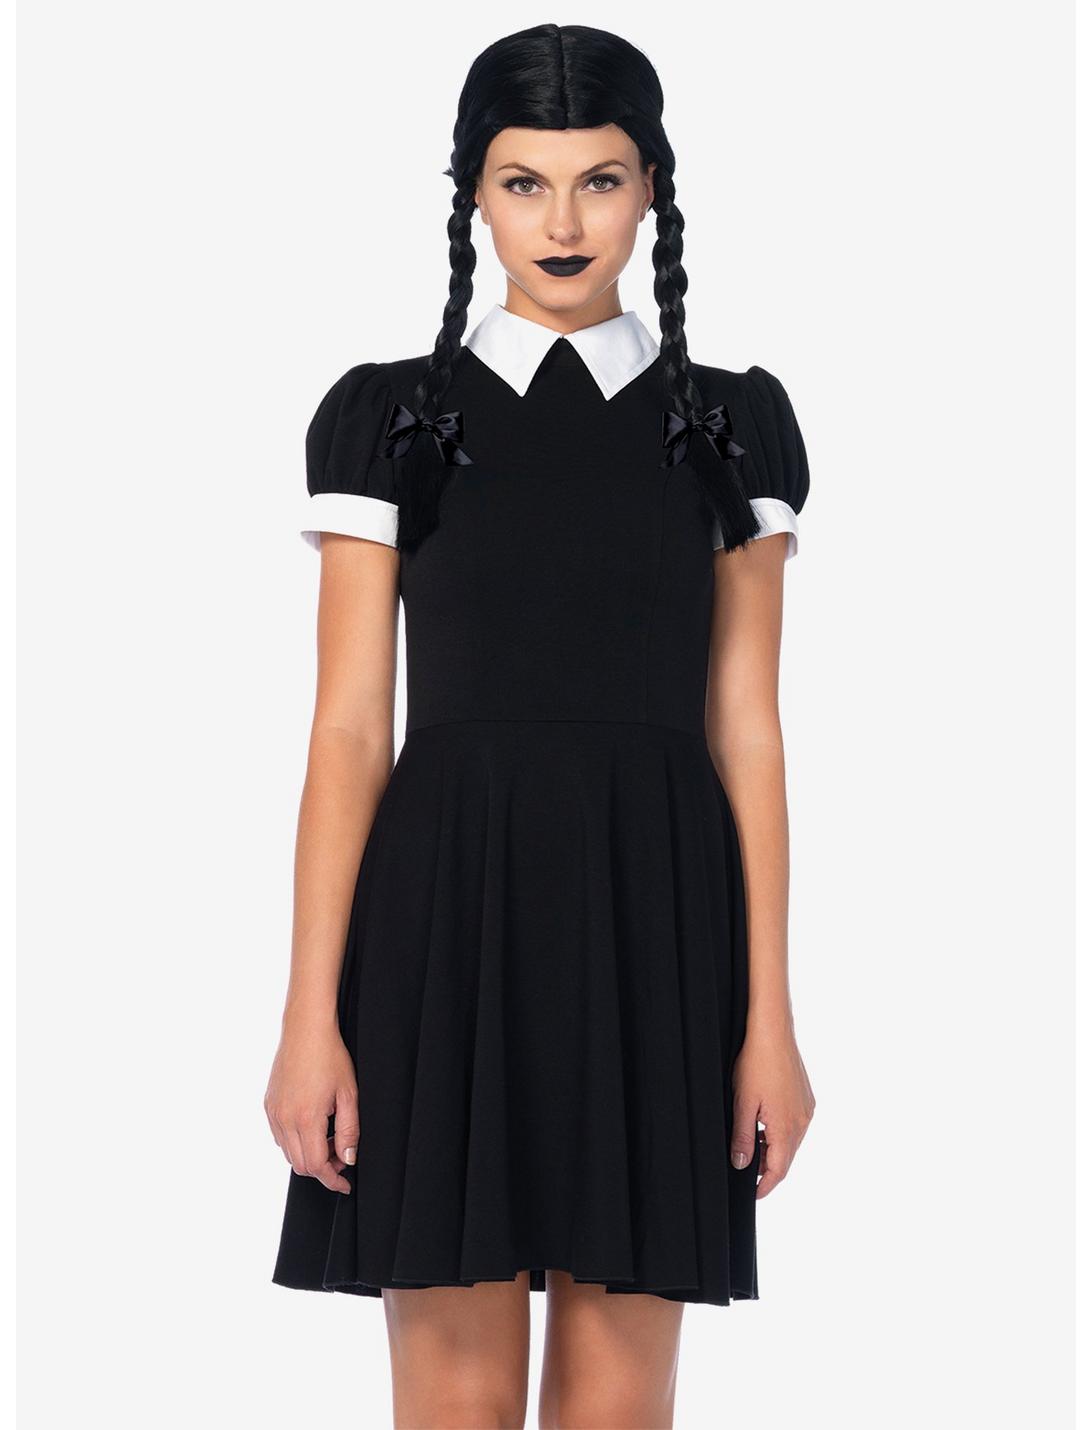 Gothic Darling Classic Collared Dress, , hi-res